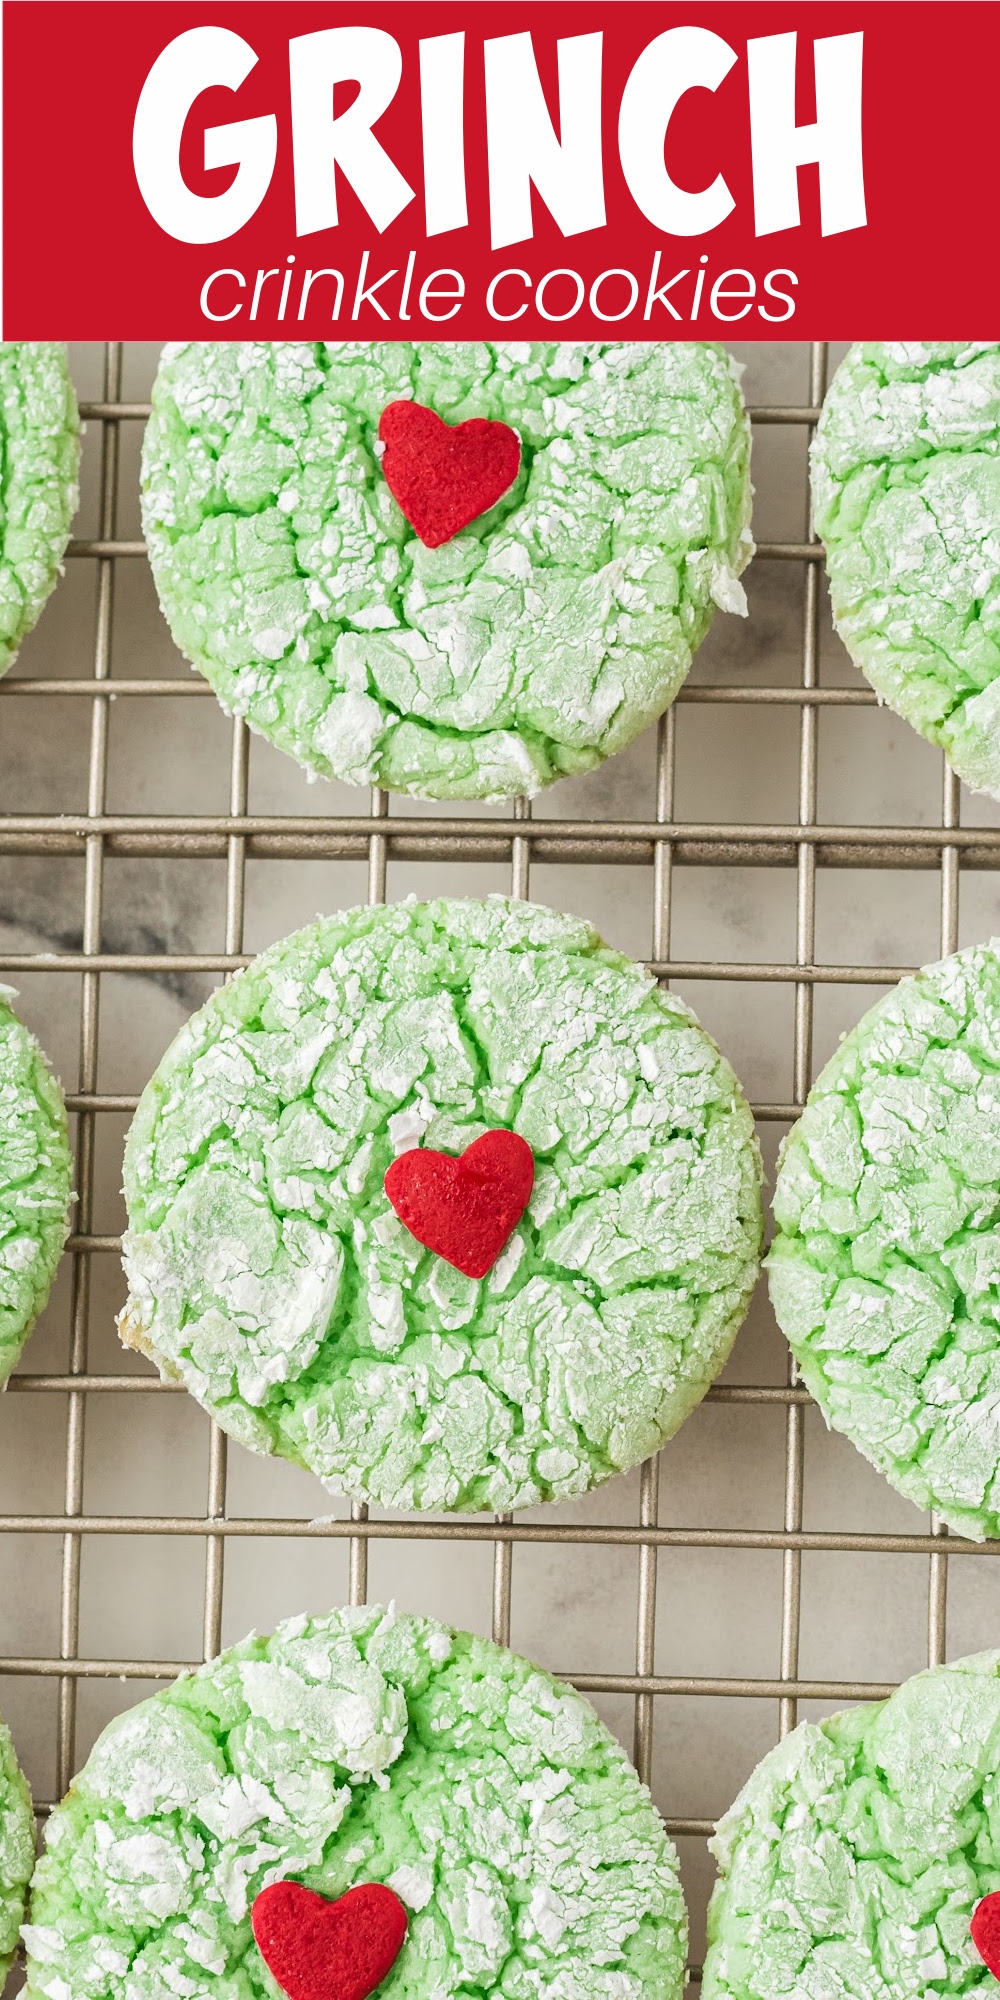 Grinch crinkle cookies are an easy cake mix cookie that's soft and delicious! These fun treats have a huge red sprinkle in the center of the soft cookie that kids and adults love.